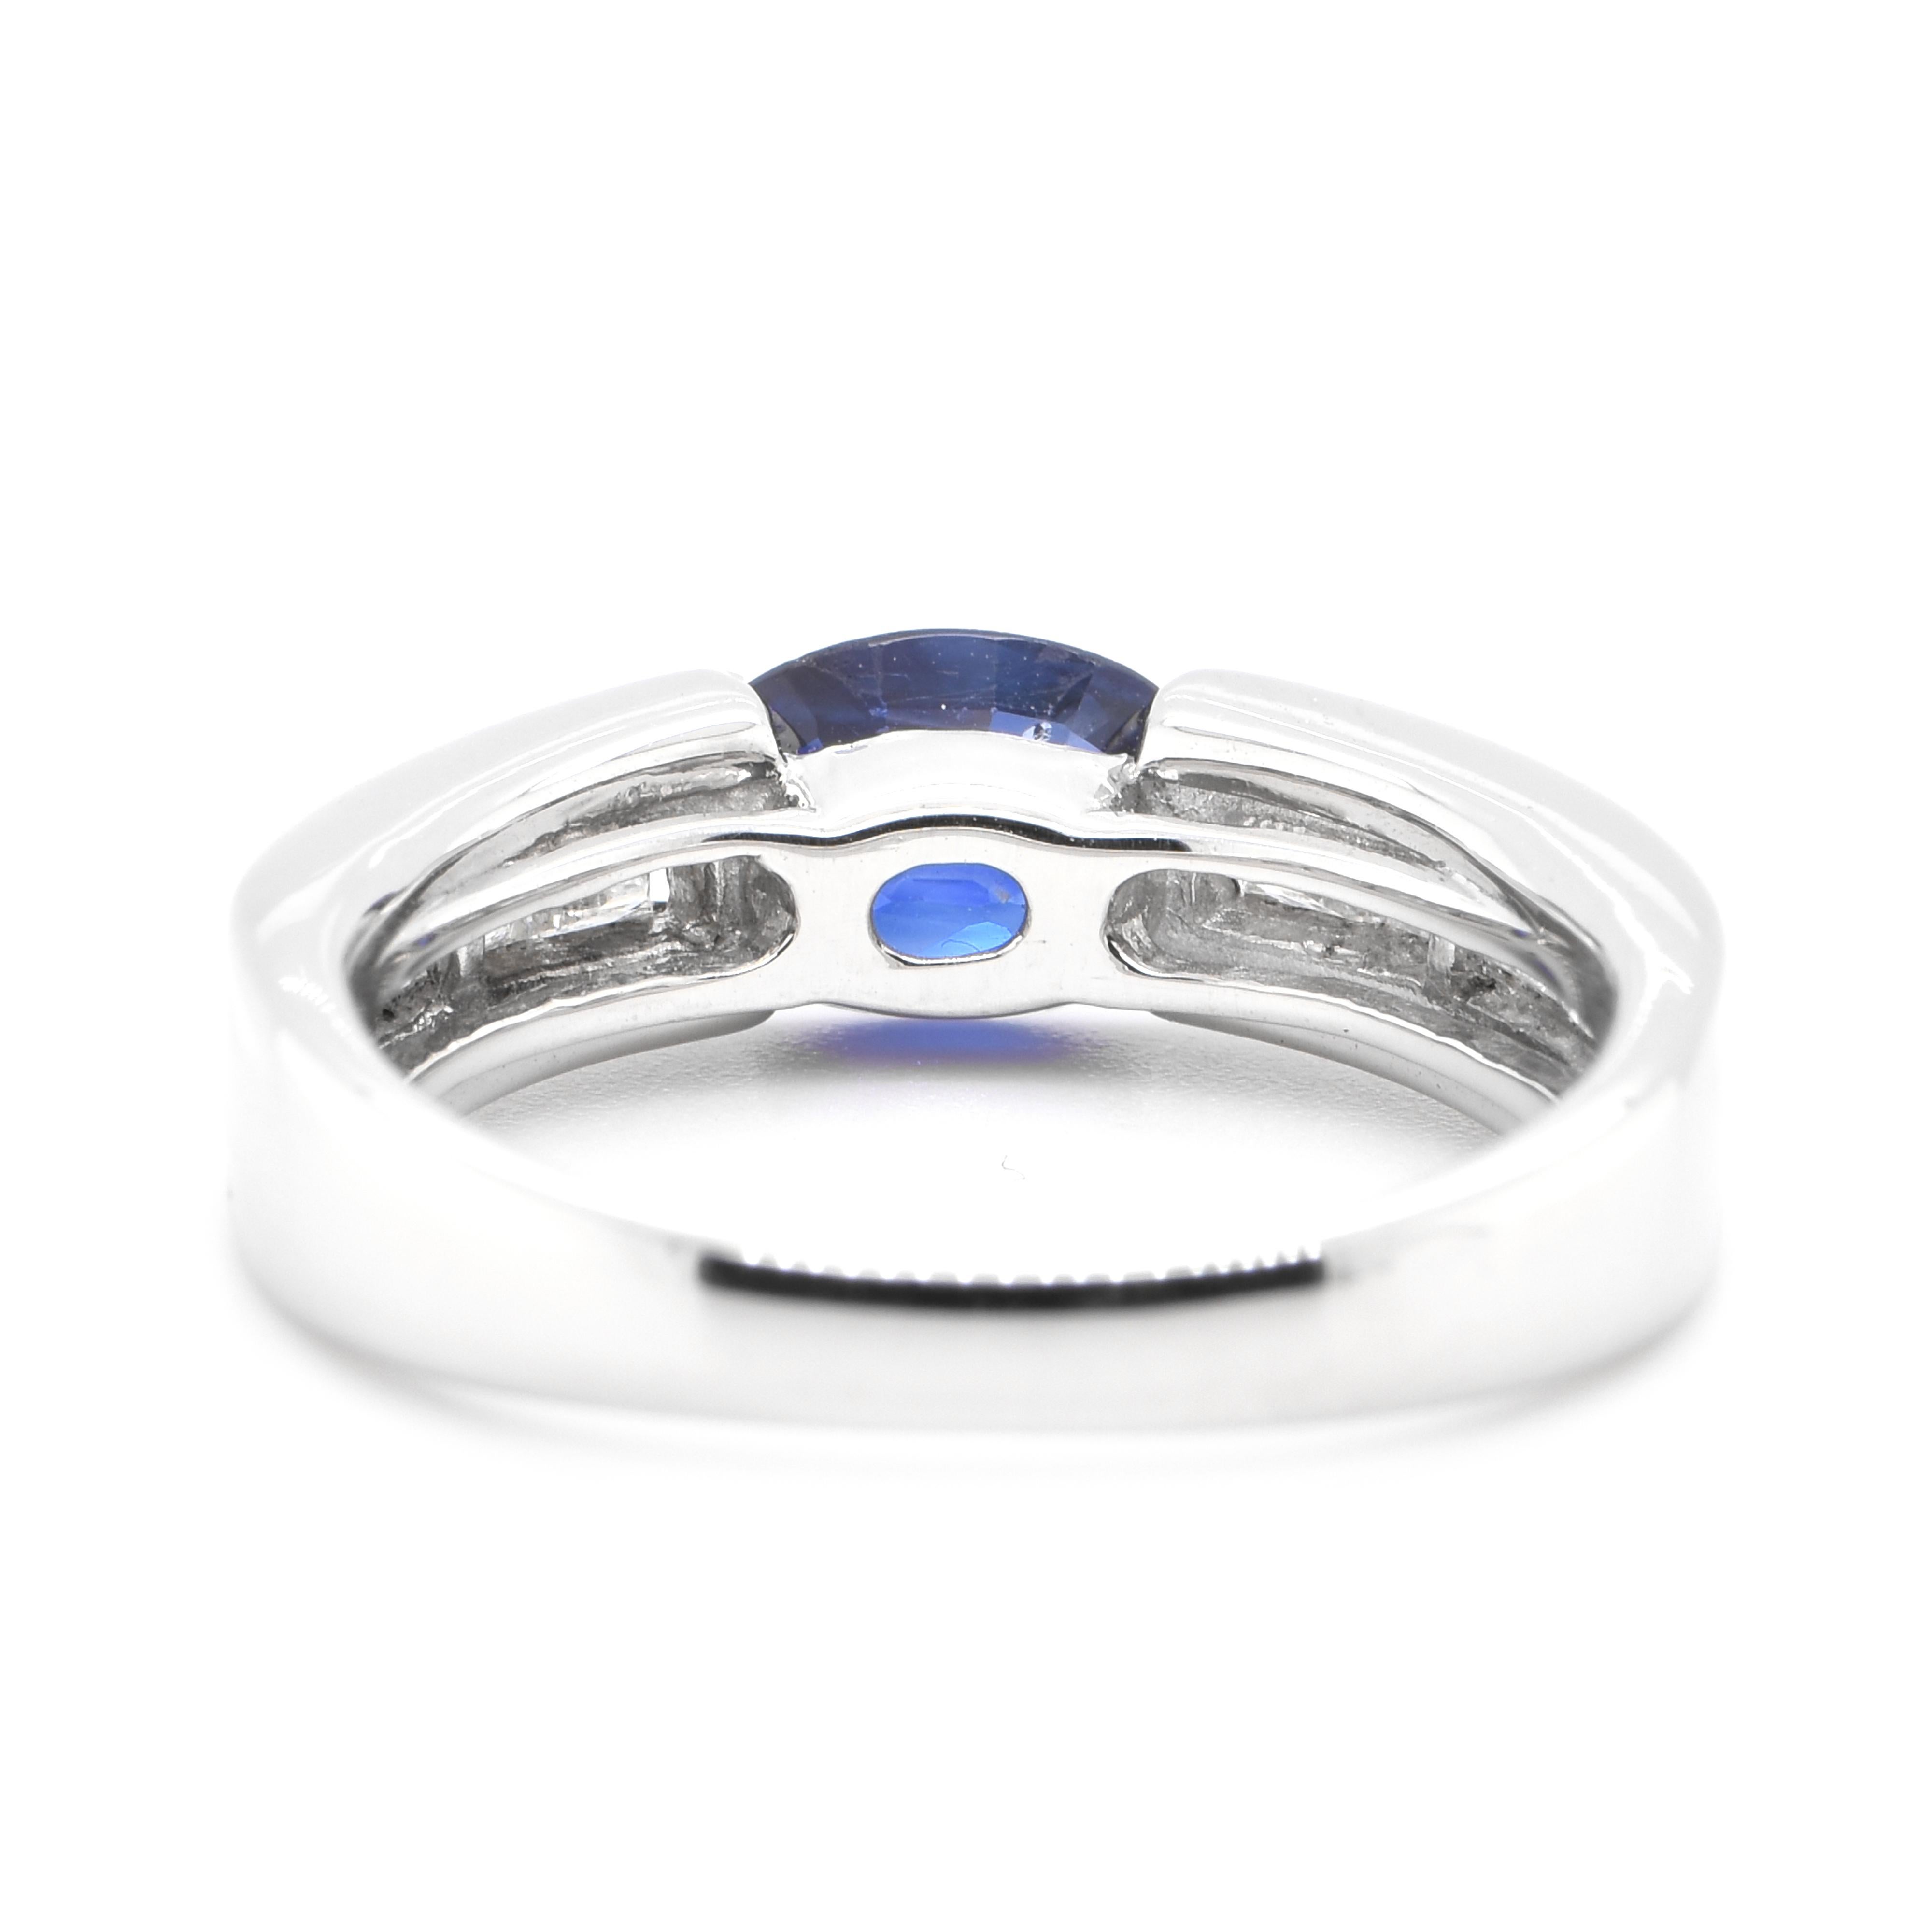 Women's 1.53 Carat Natural Blue Sapphire and Diamond Band Ring Set in Platinum